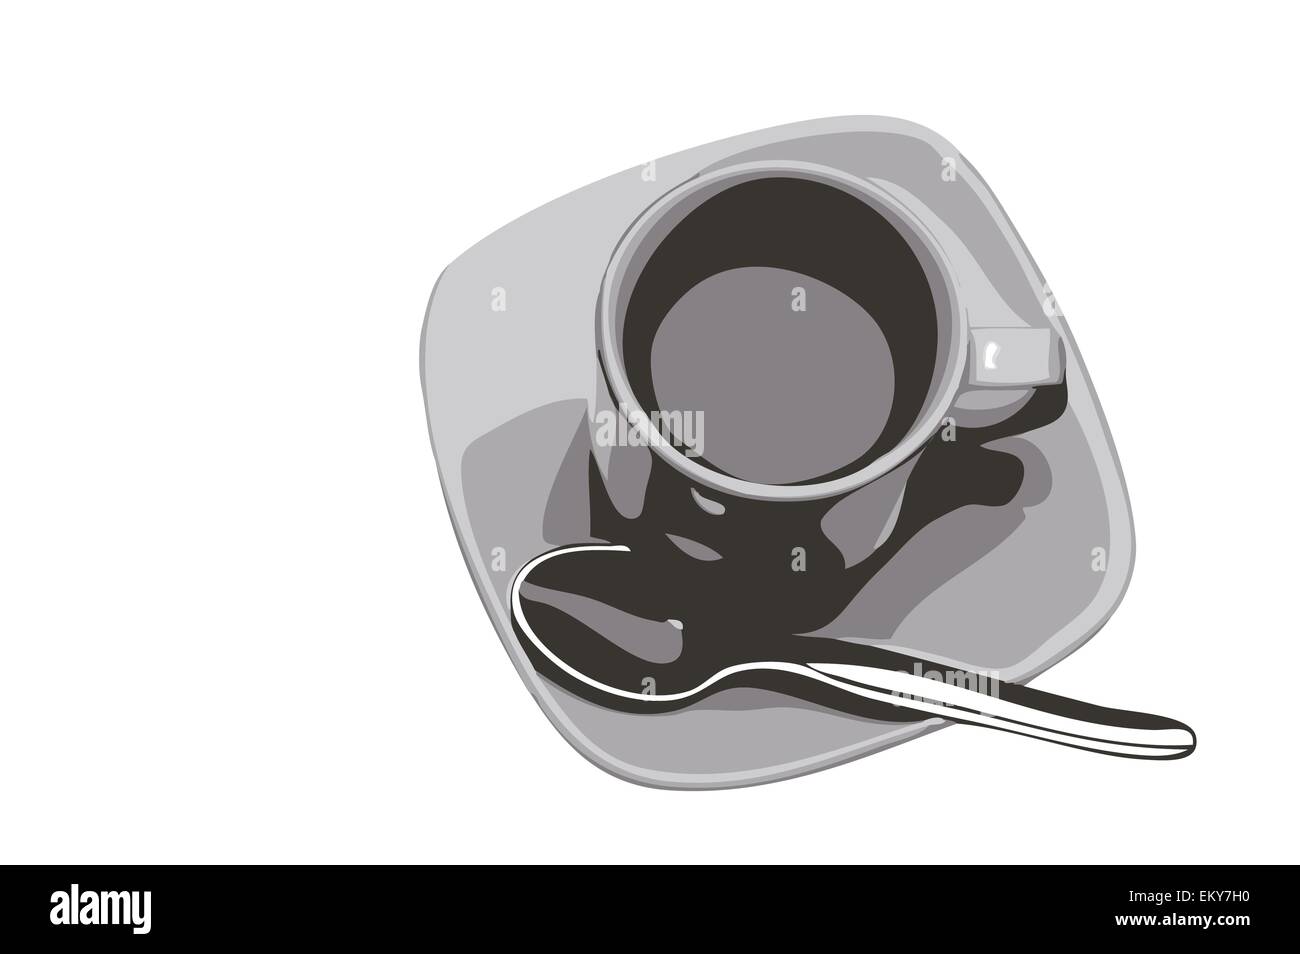 Coffee cup cup of coffee vector illustration Stock Vector